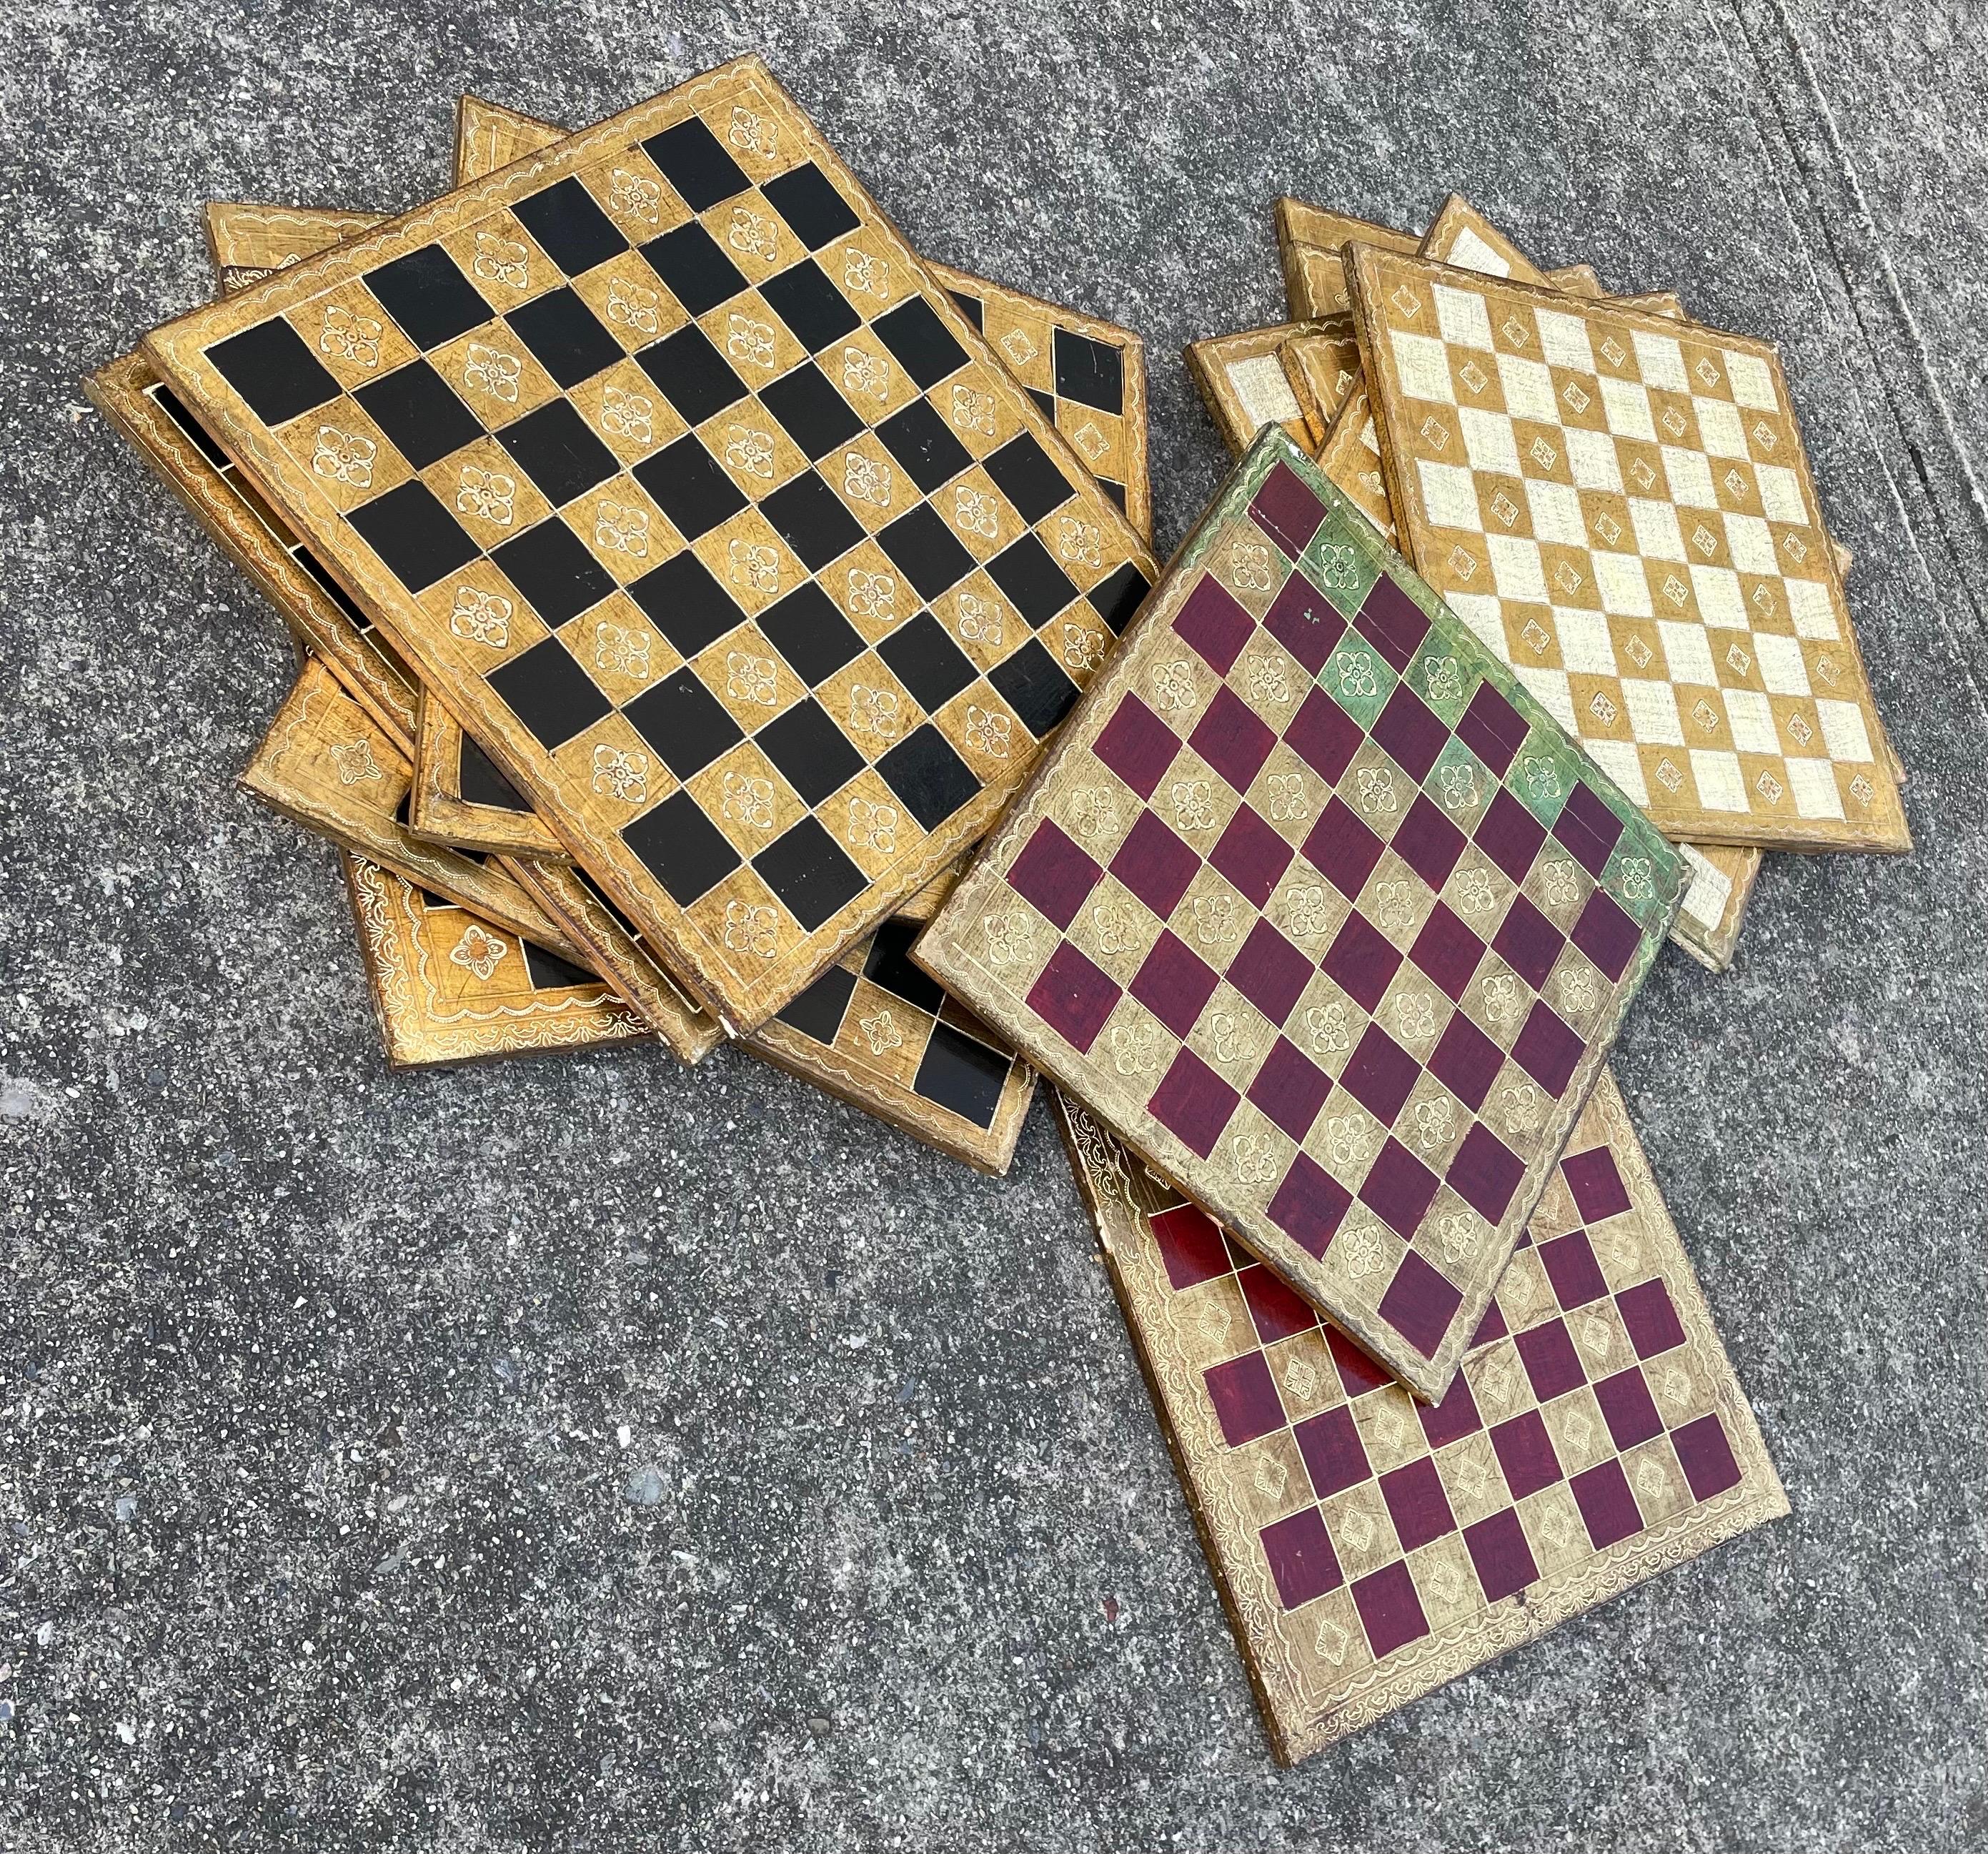 Gothic Revival Mid Century Wooden Tiles, Hand Painted Checkerboard Design, Gold Accents, Italy For Sale